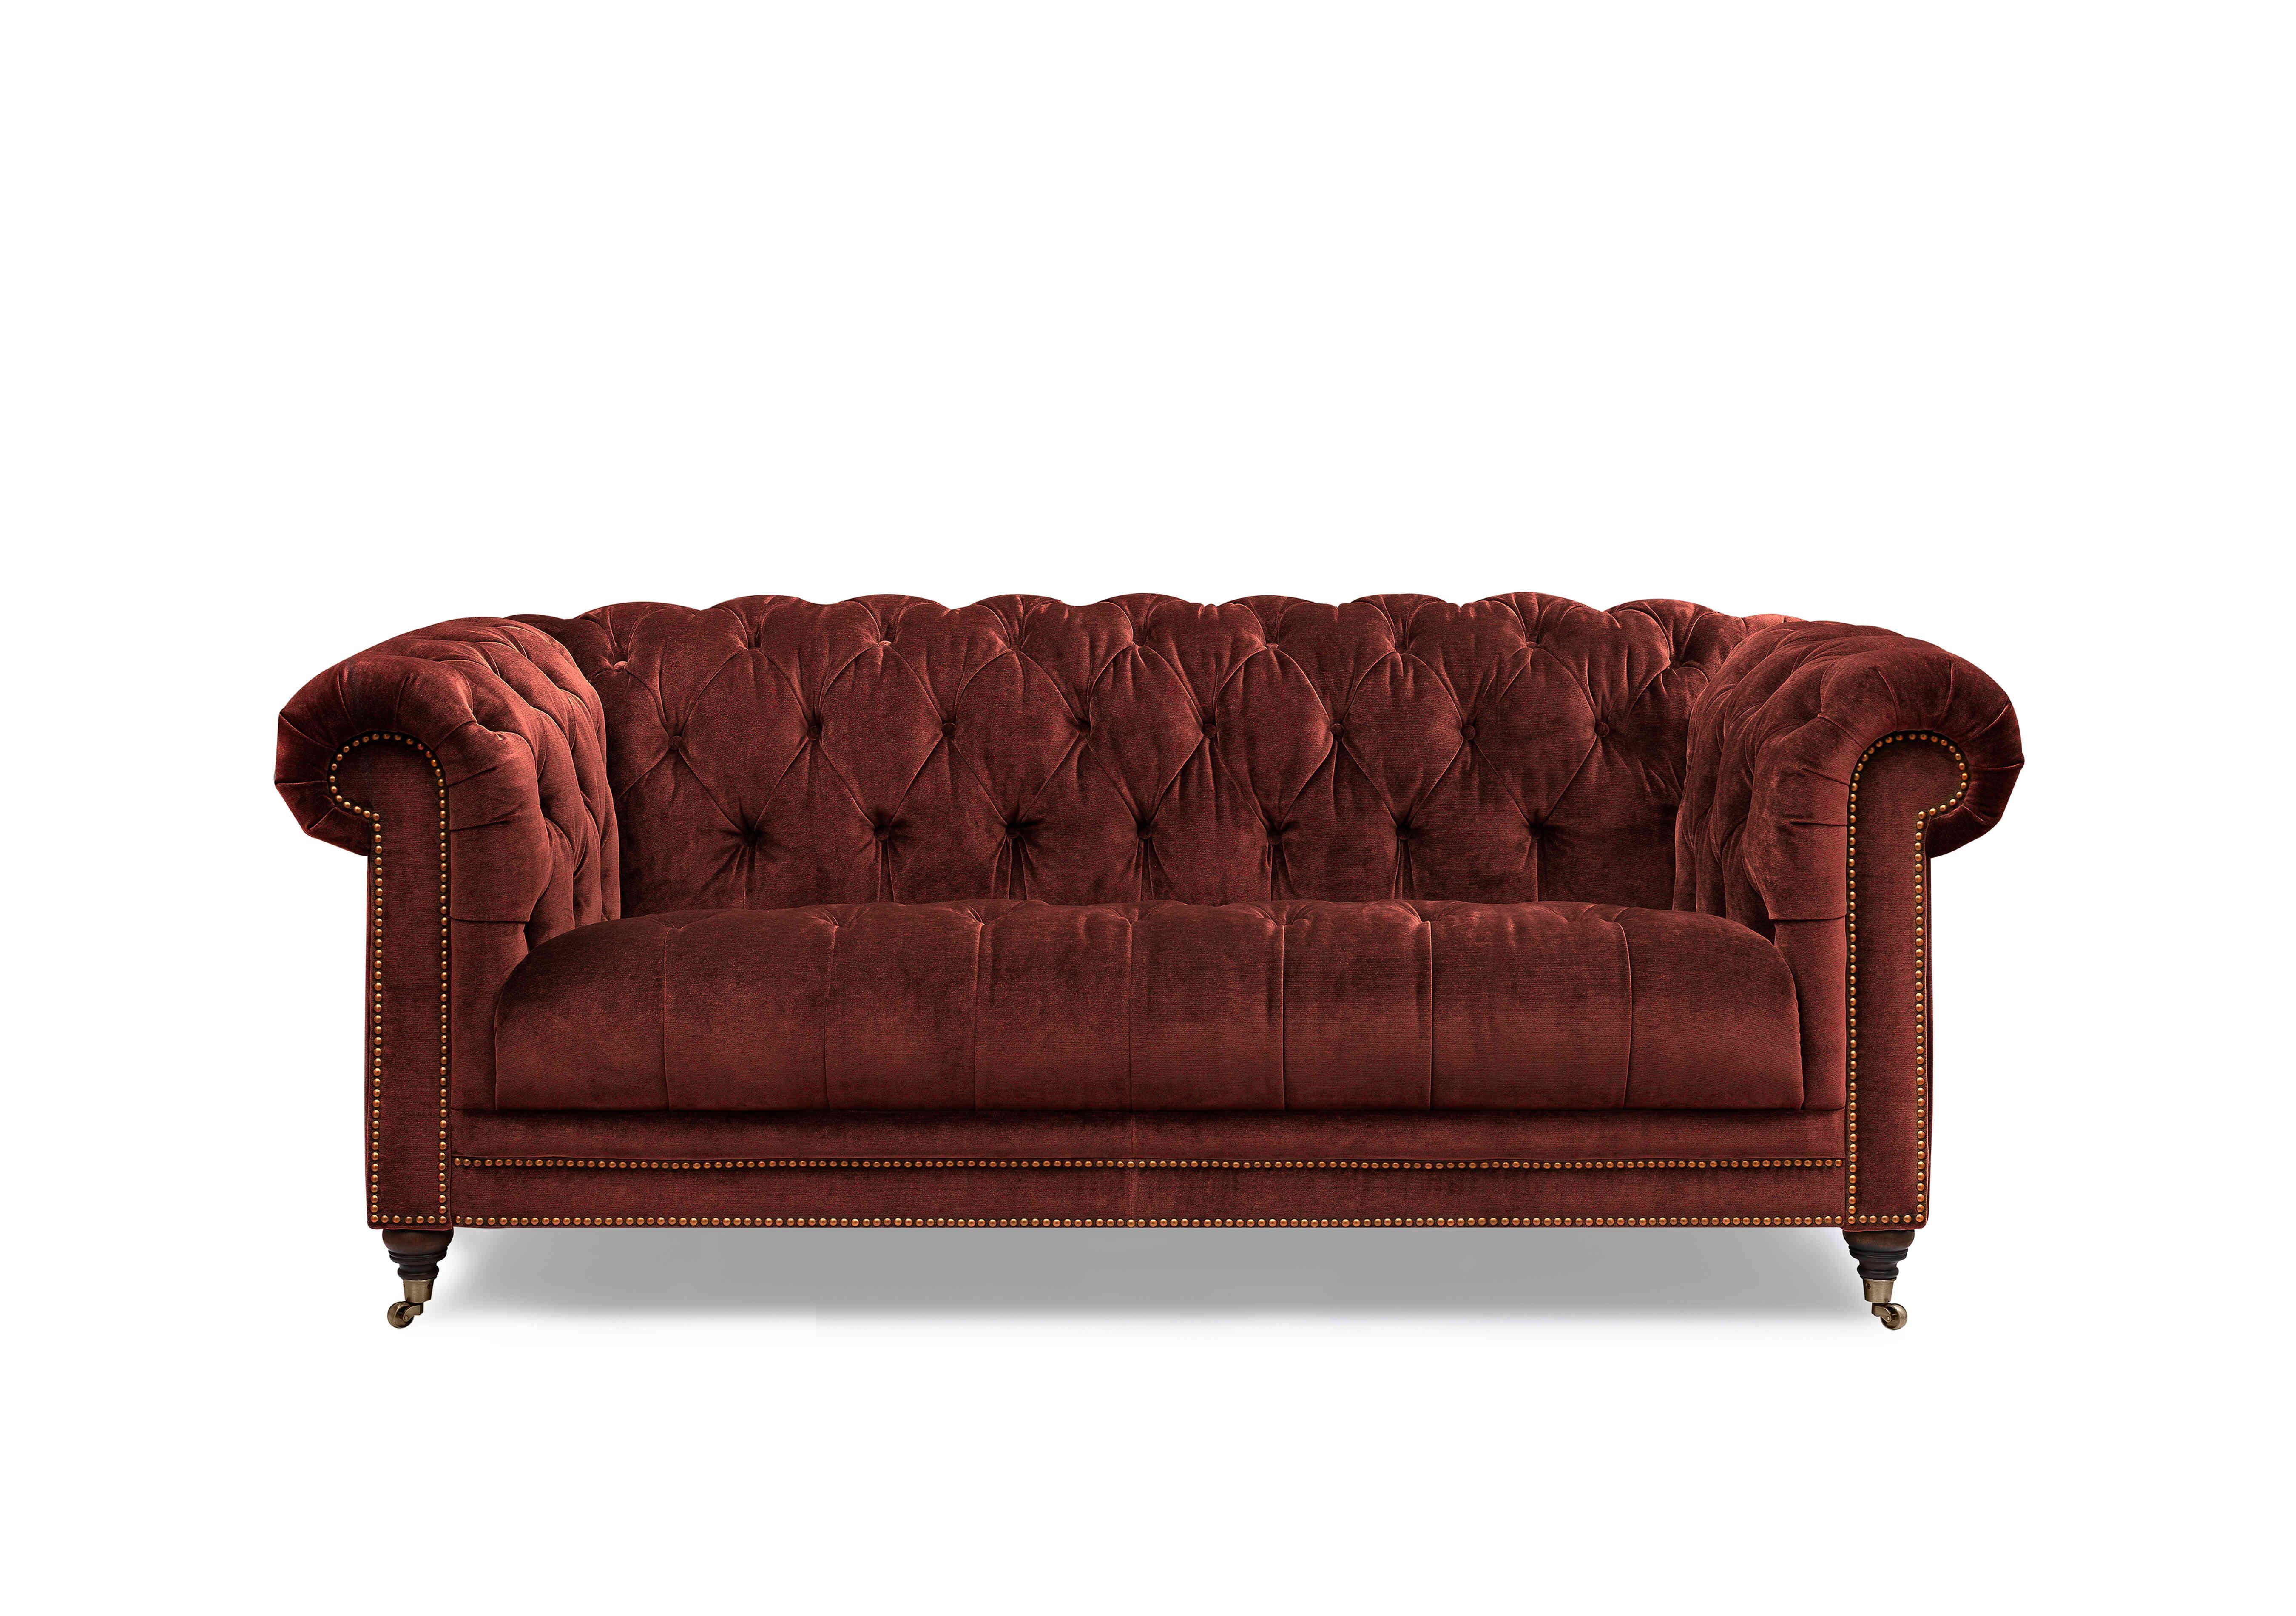 Walter 3 Seater Fabric Chesterfield Sofa in X3y1-W019 Tawny on Furniture Village